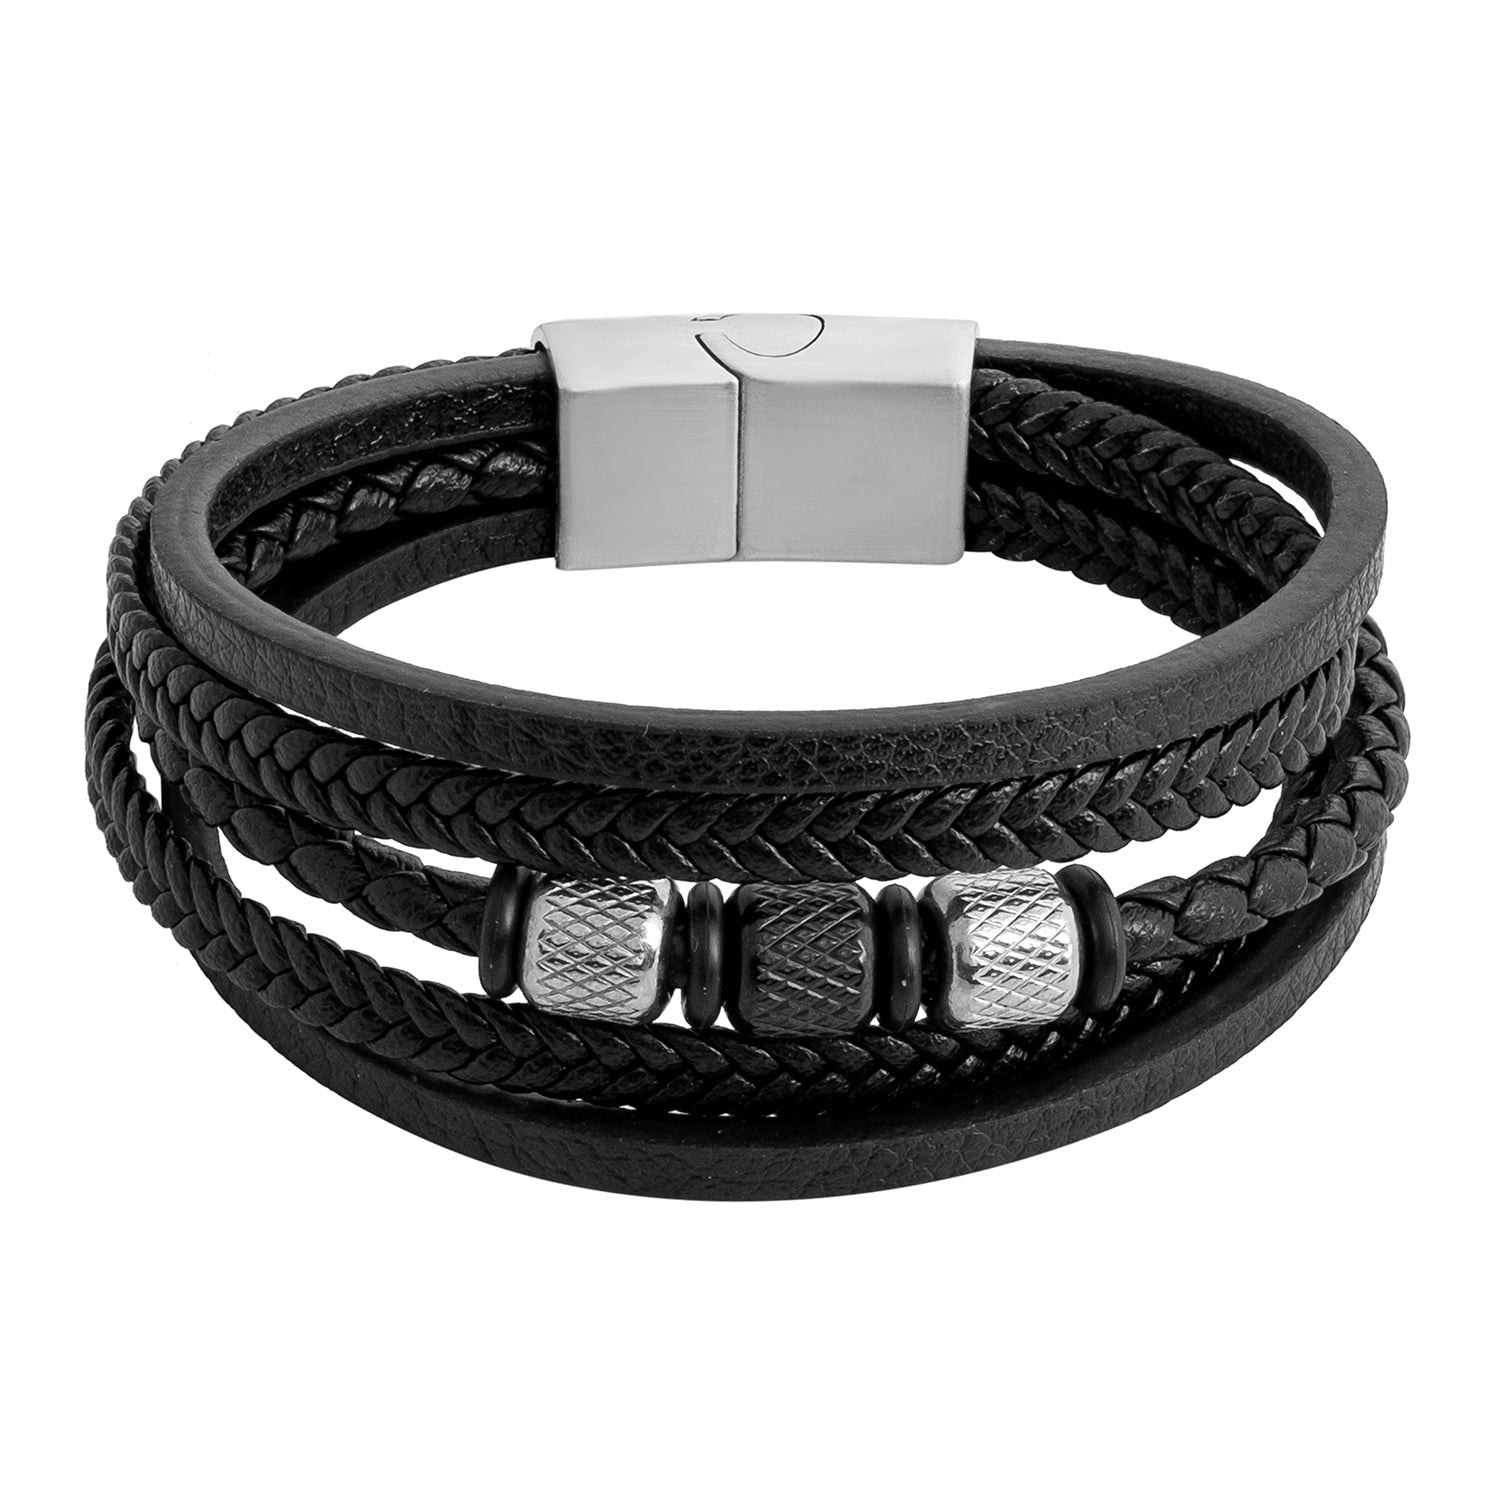 Buy Peora Black Leather Bracelet Combo of 4 Stylish Fashion Design Hand  Jewellery Gift for Men & Boys (PX9LB30) at Amazon.in